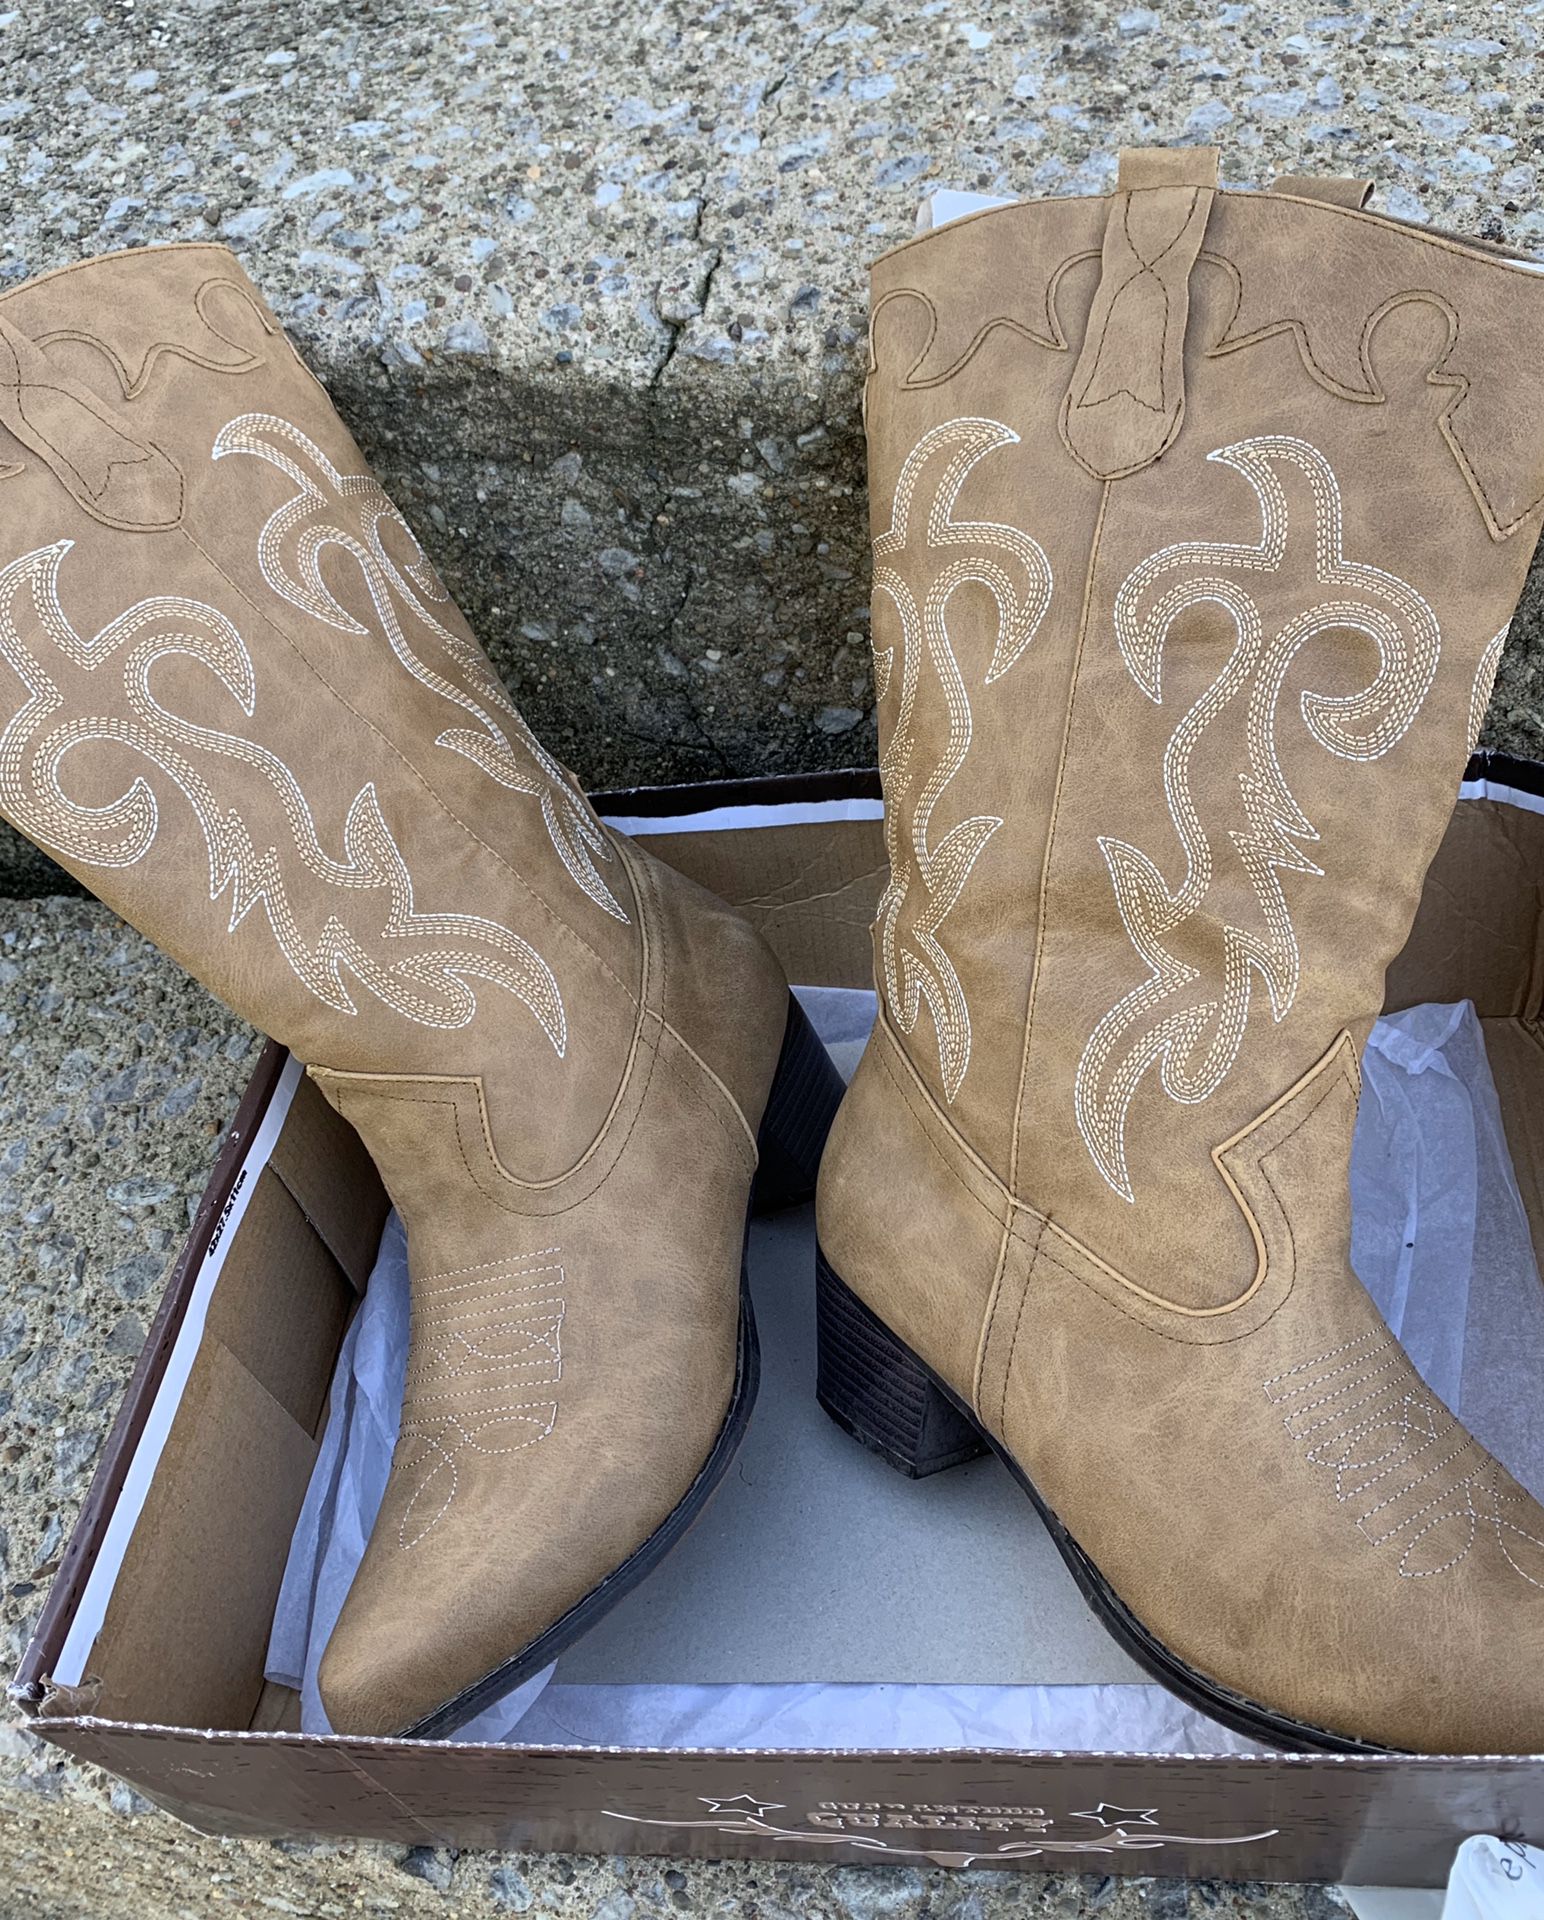 Size 8 Canyon Trails Rodeo boots